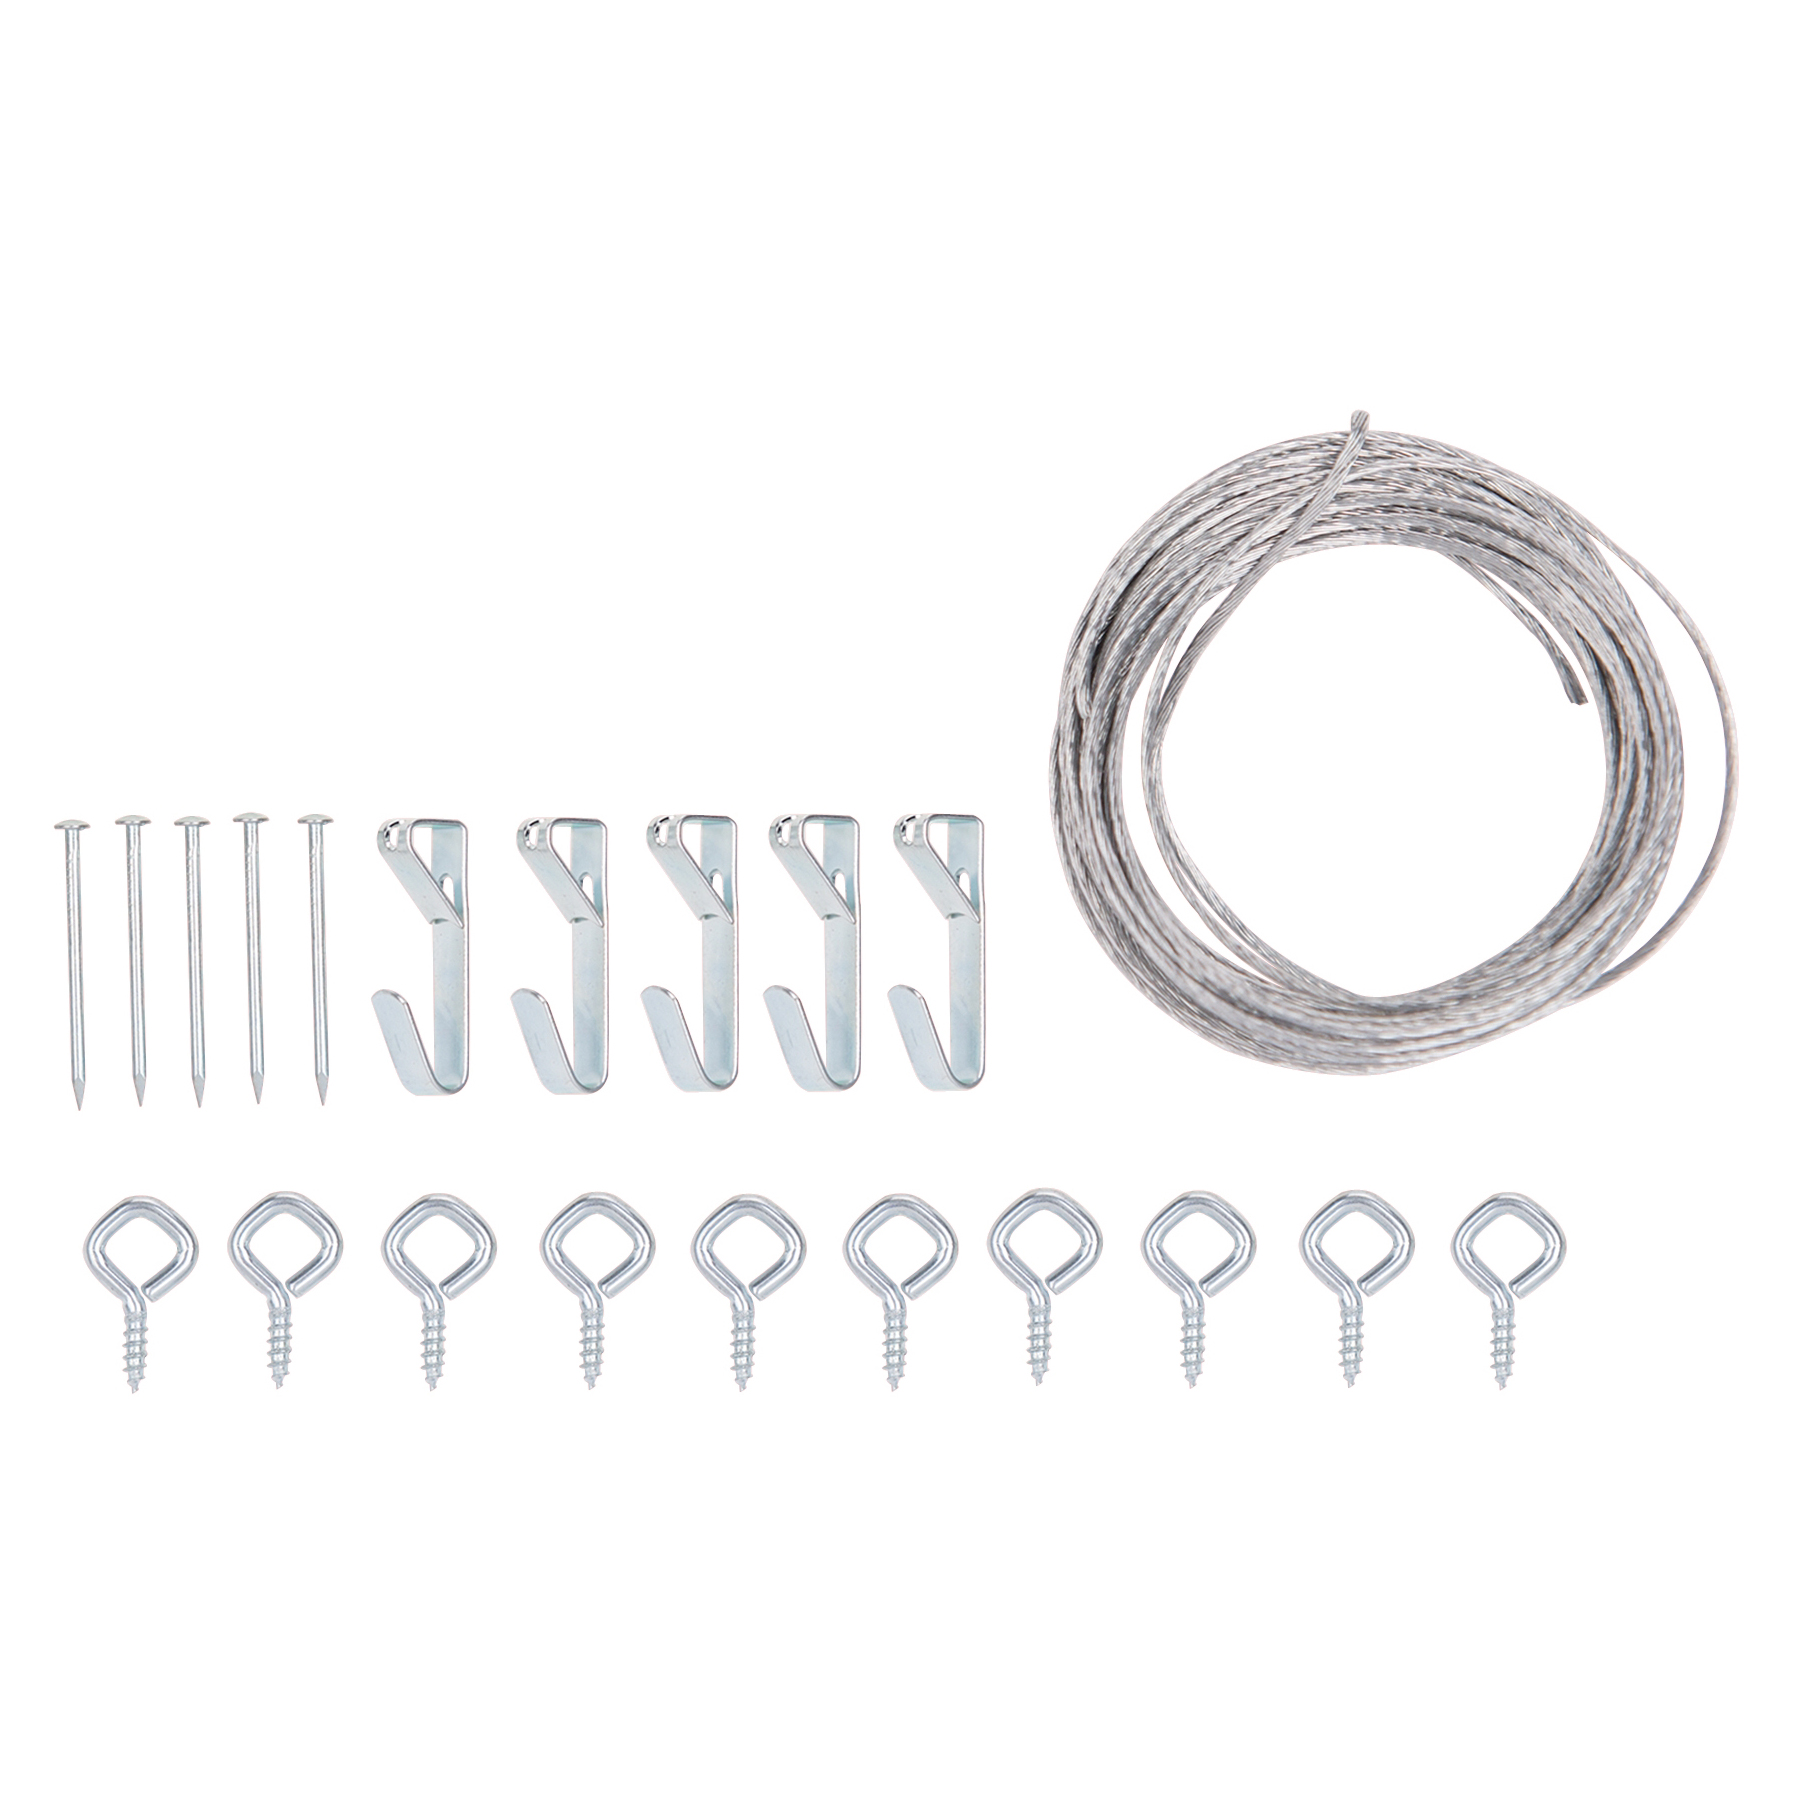 PH-121127-PS Picture Hanging Kit, 20 lb, Steel, Zinc, Zinc, Nail-In Mounting